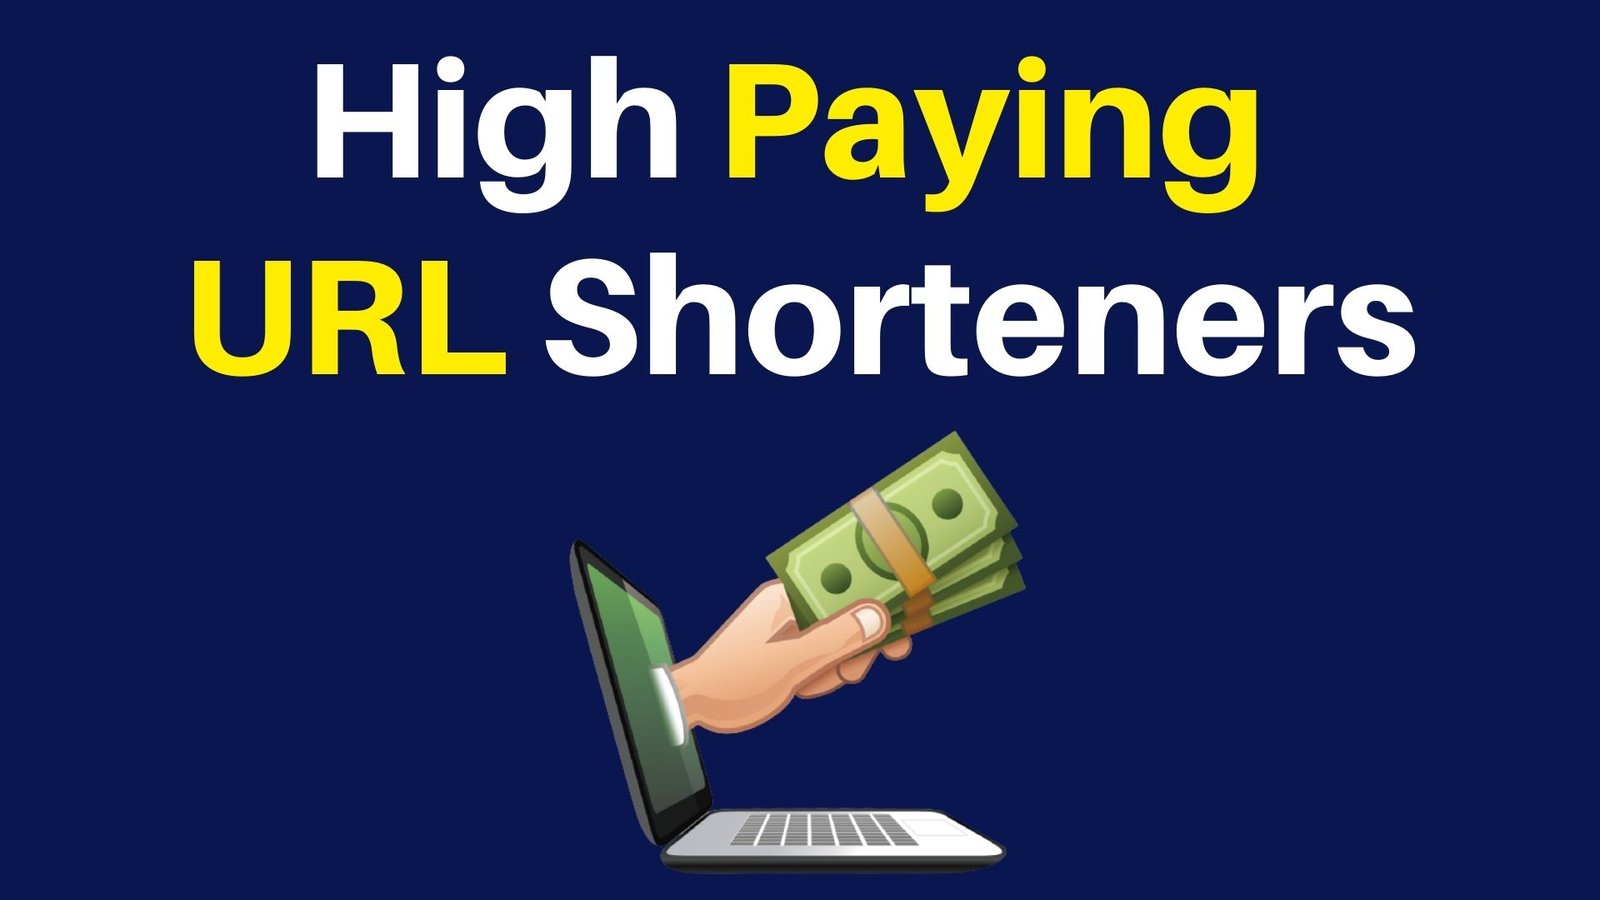 20+ Best Highest Paying URL Shorteners in 2022 (High Paying)